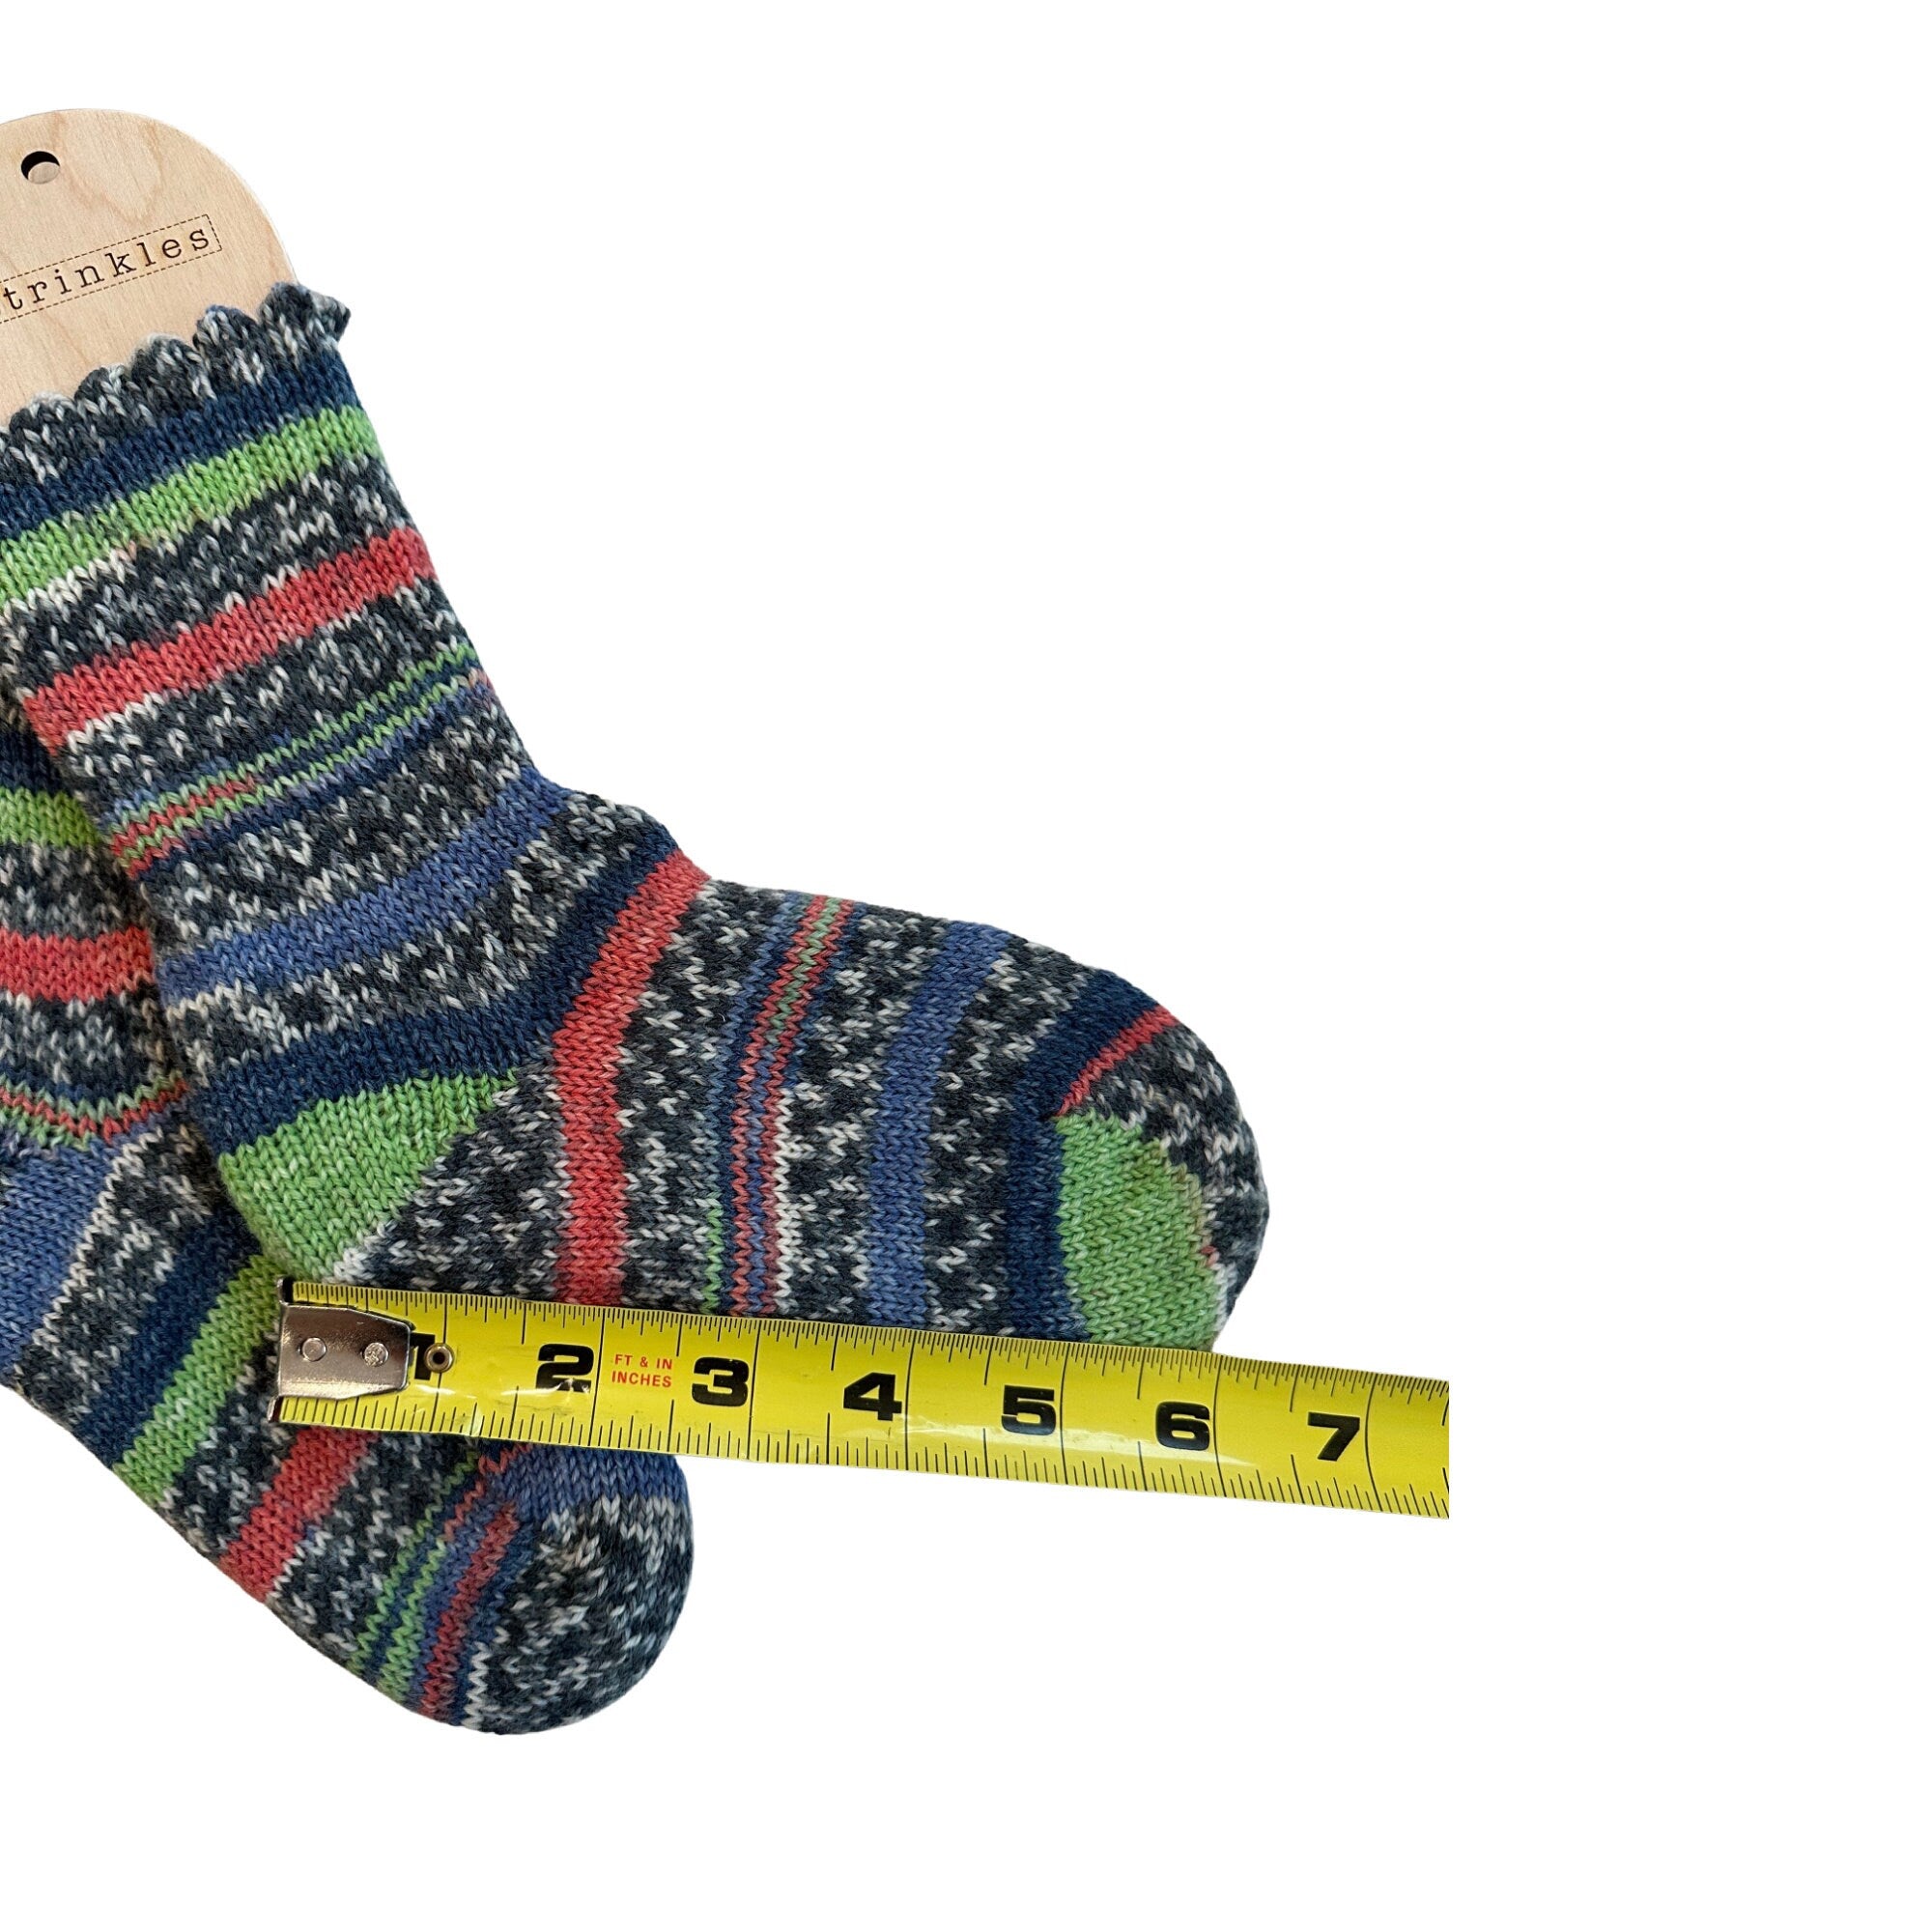 HandMade Children's Wool Socks, Colorful and Cozy